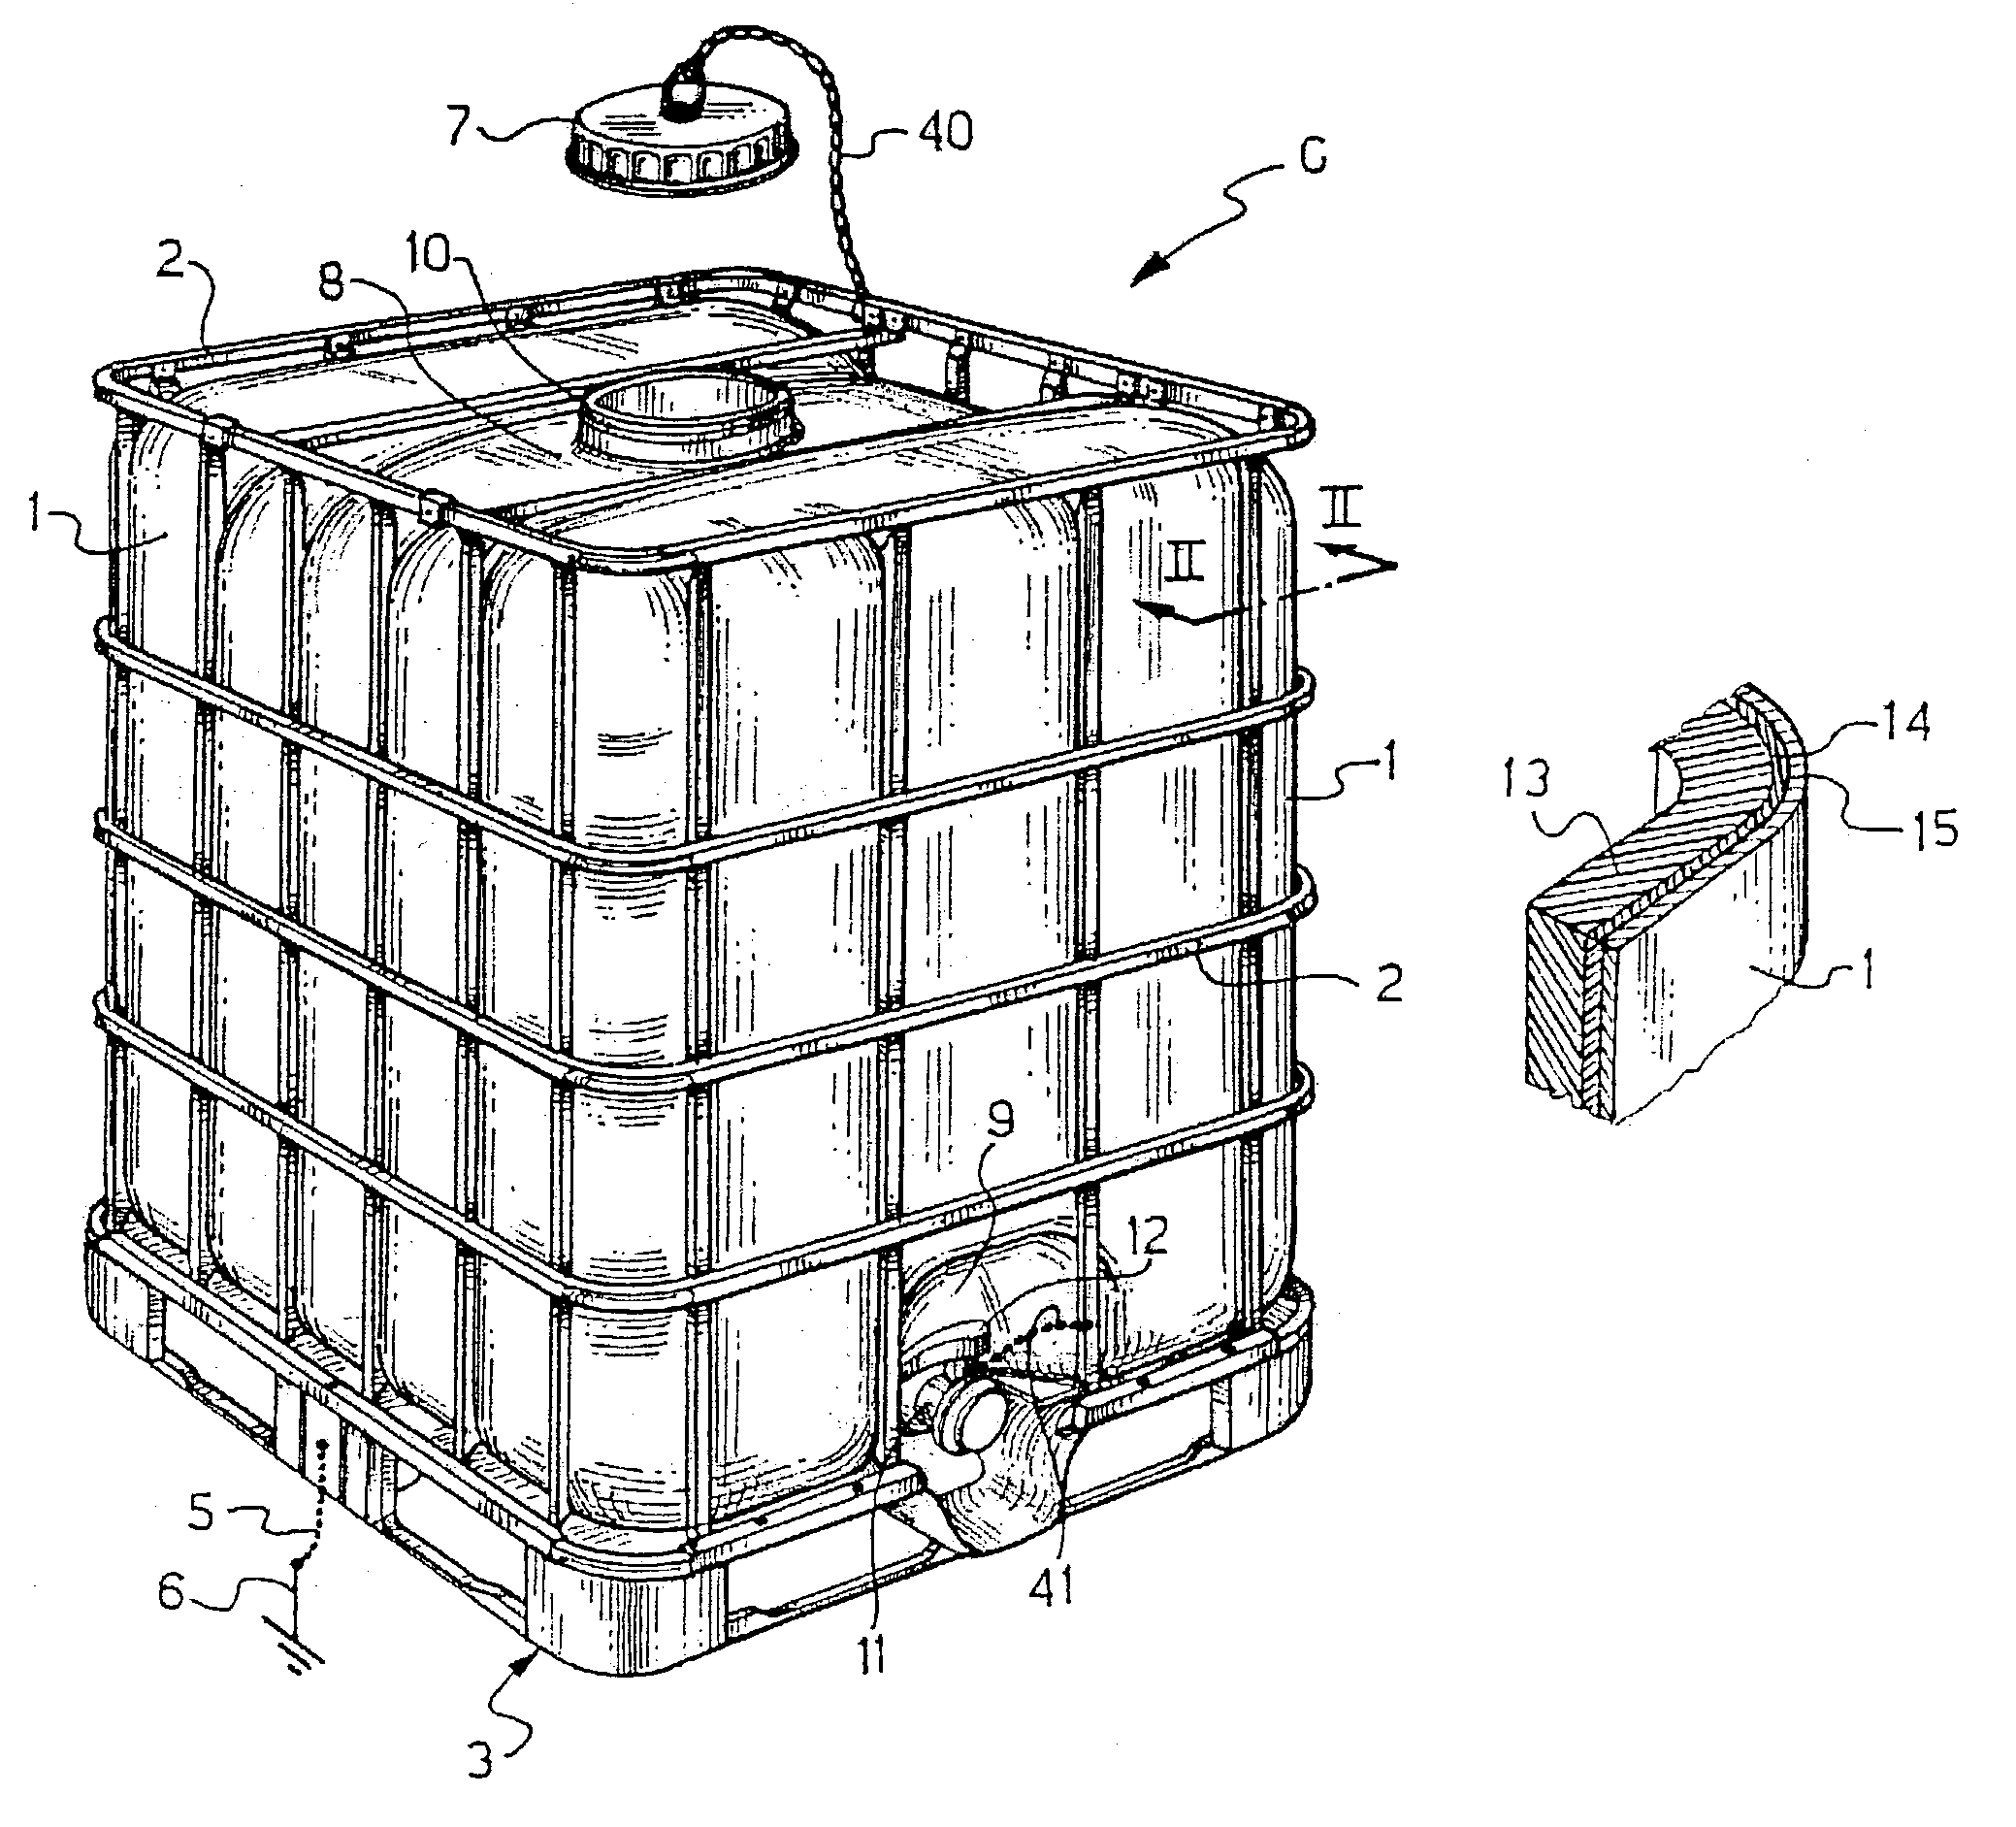 Electrostatic charge-free container